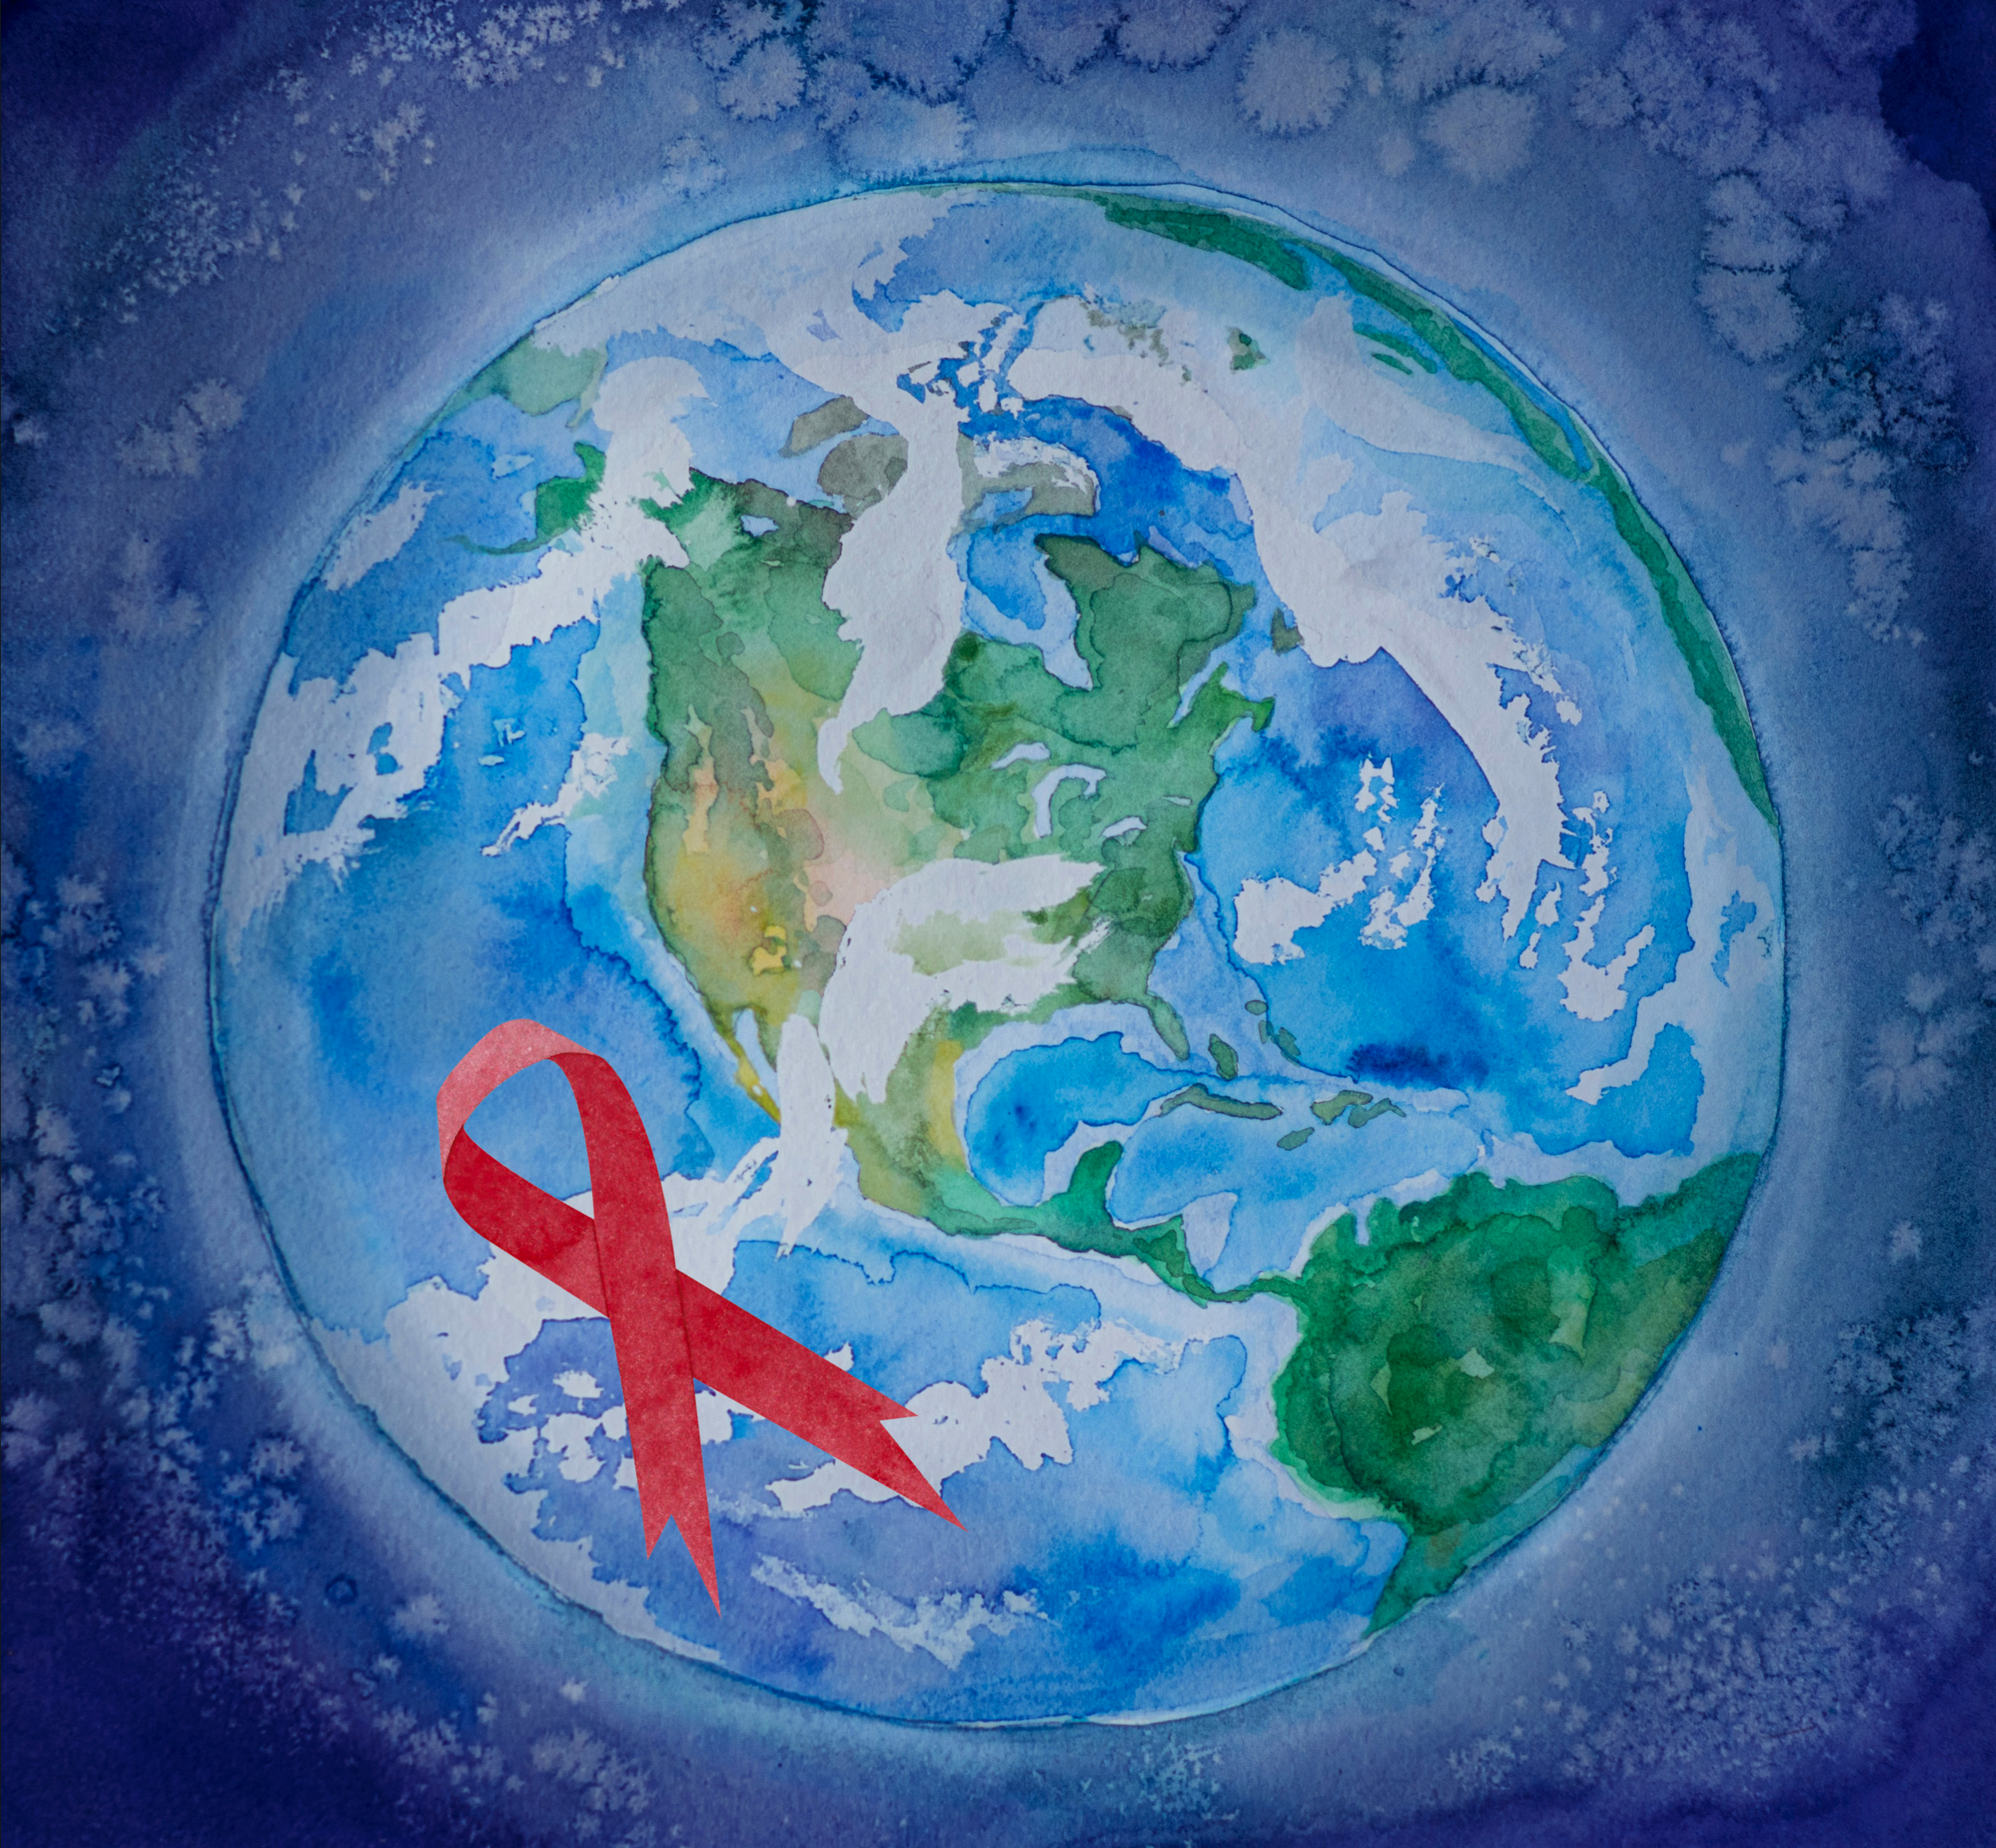 2020 Global HIV Policy Report: Policy Barriers to HIV Progress